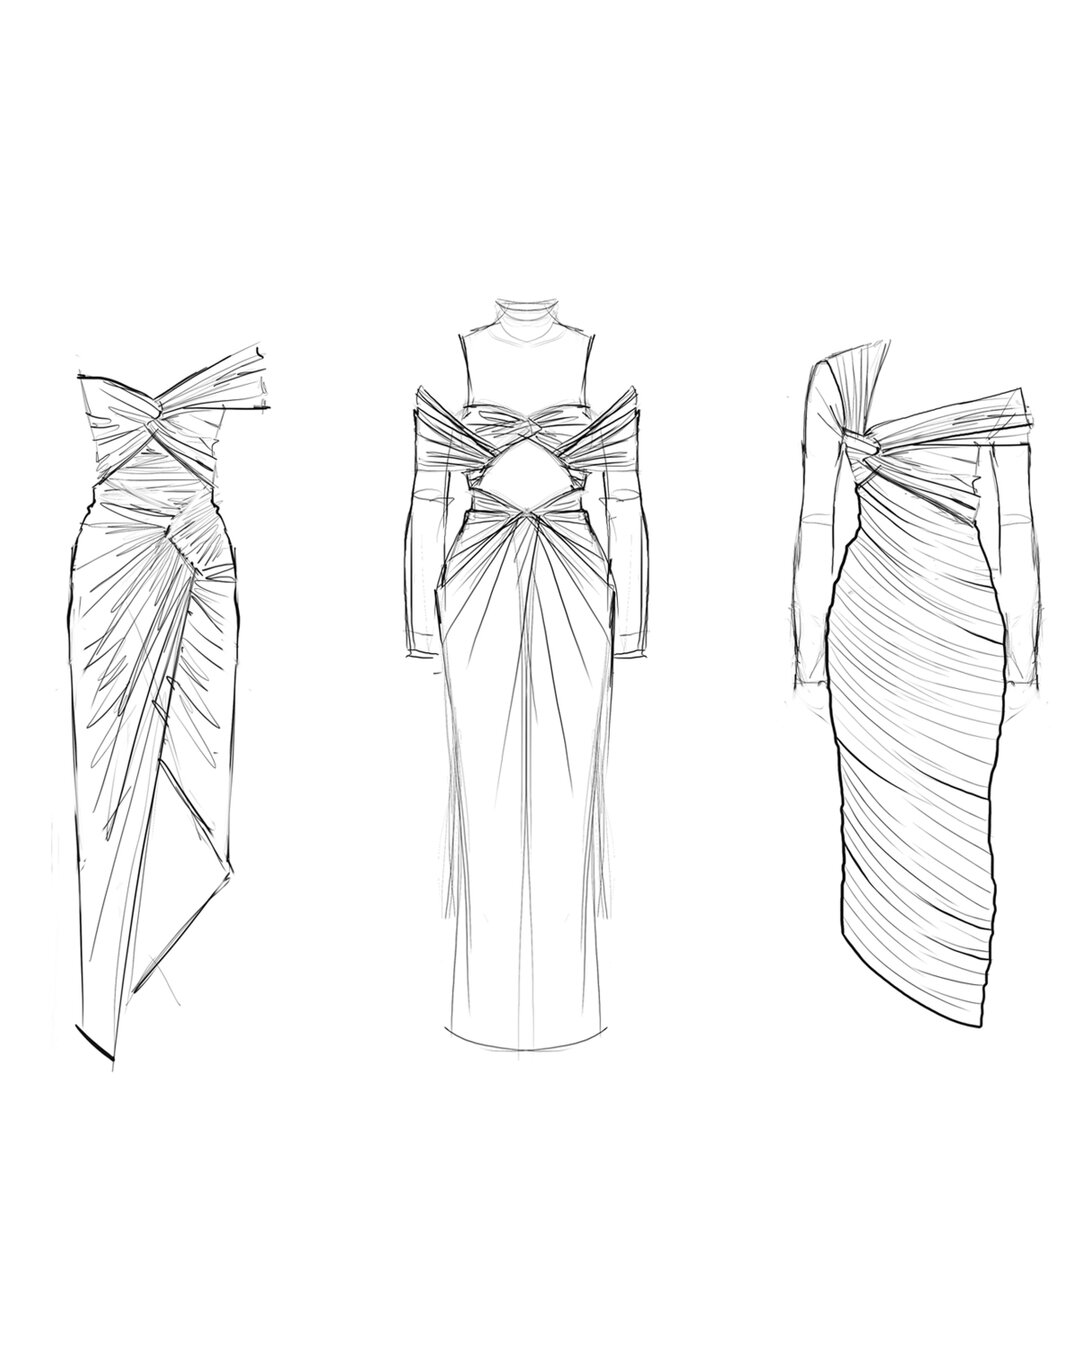 Rough concept sketches: Draping, ruching, and twists. I like to brainstorm multiple options to explore detail and silhouette, then narrow it down to a final design. ​​​​​​​​
​​​​​​​​
Swipe to see the first two designs, and let me know which one is yo